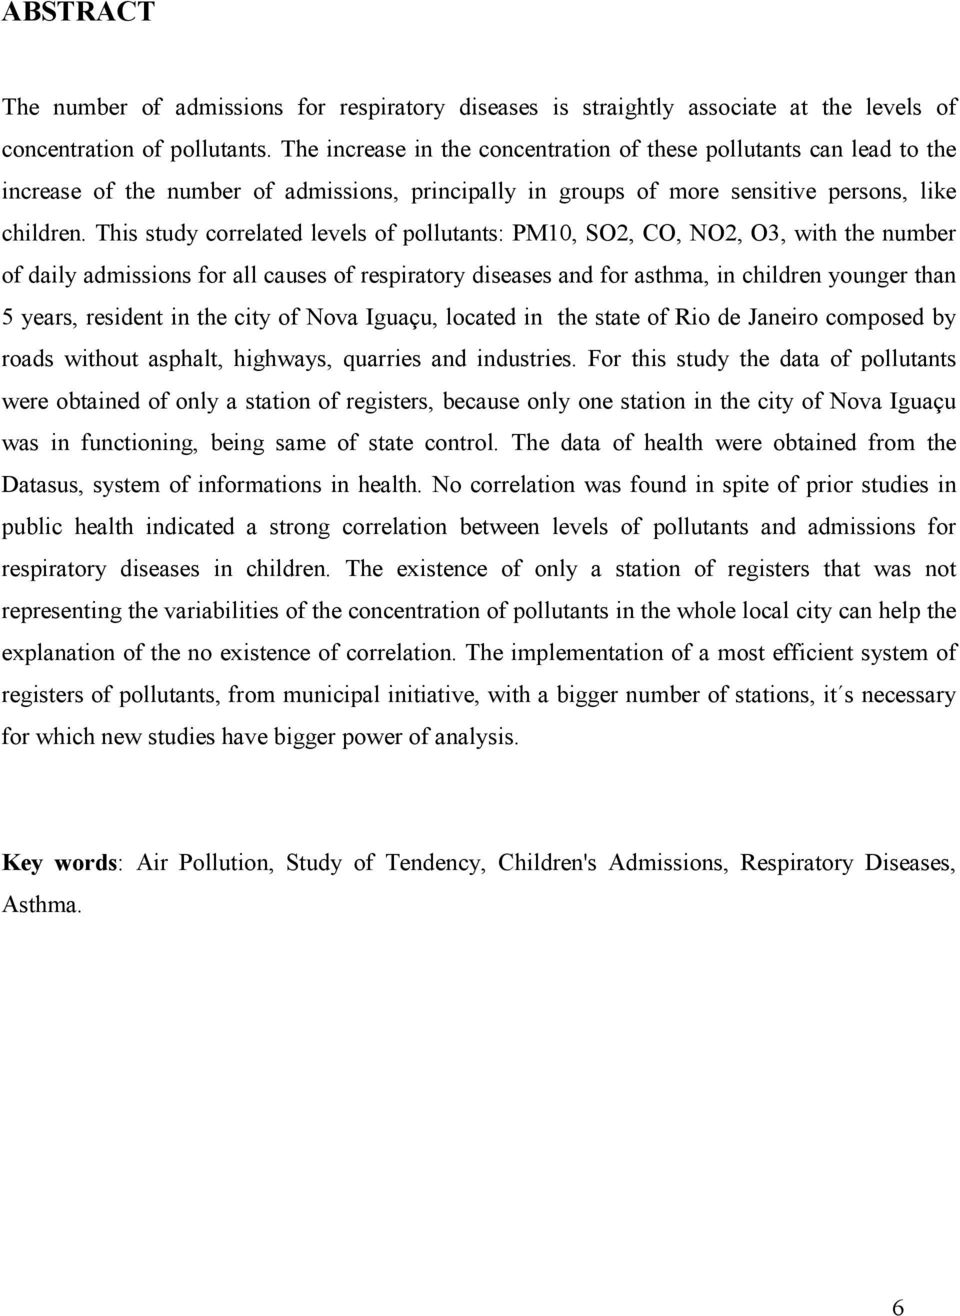 This study correlated levels of pollutants: PM10, SO2, CO, NO2, O3, with the number of daily admissions for all causes of respiratory diseases and for asthma, in children younger than 5 years,